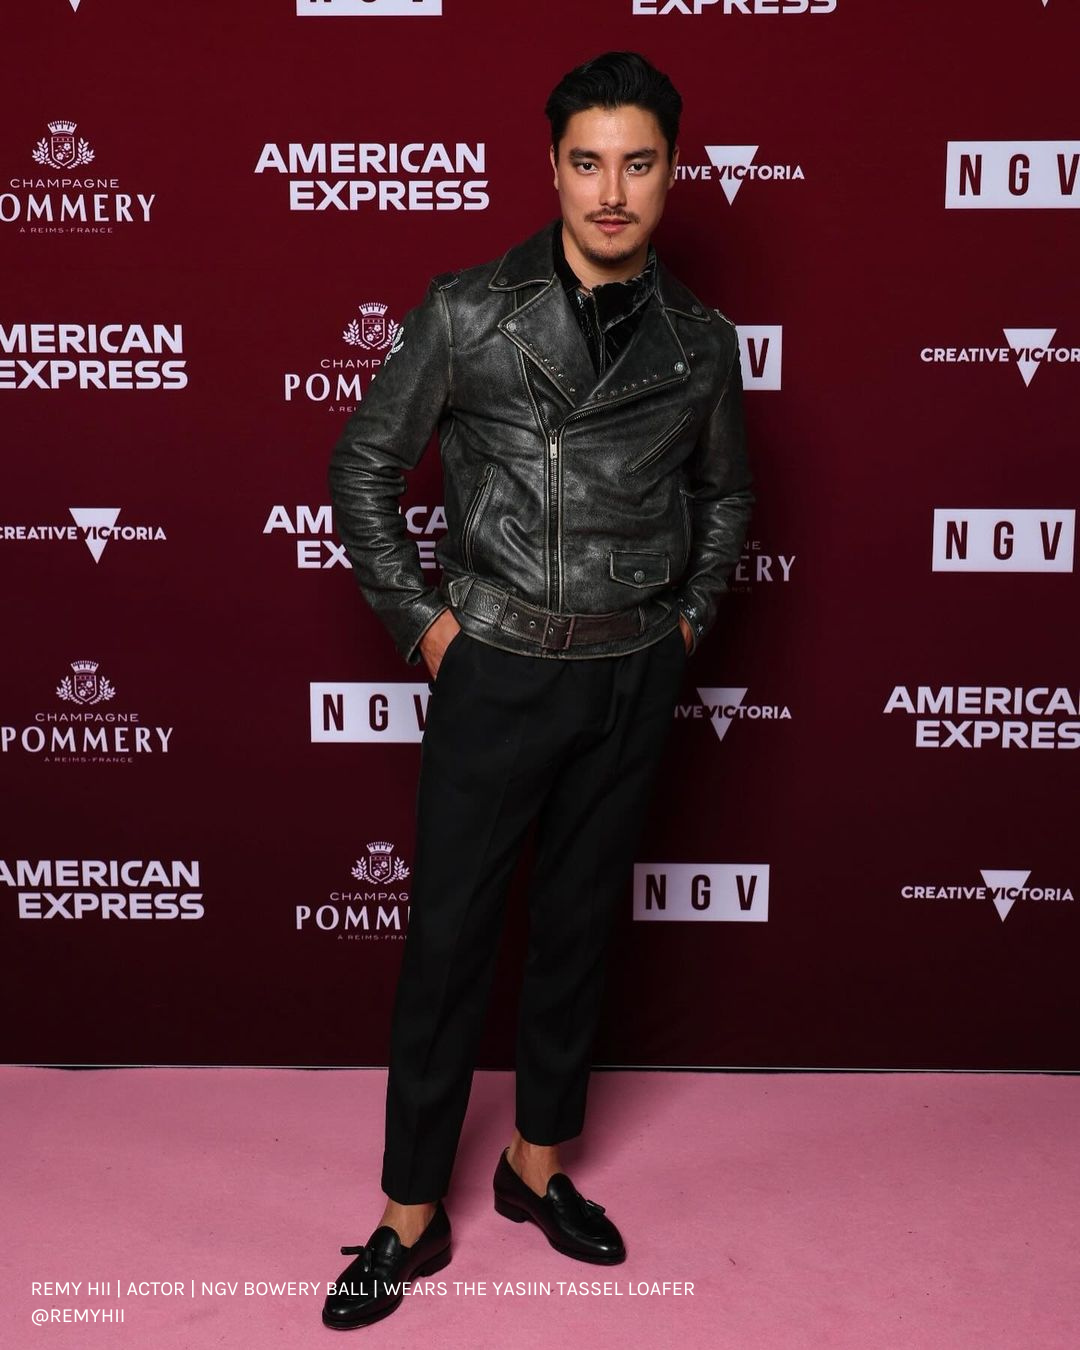 Remy Hii NGV Bowery Ball wearing Etymology loafers